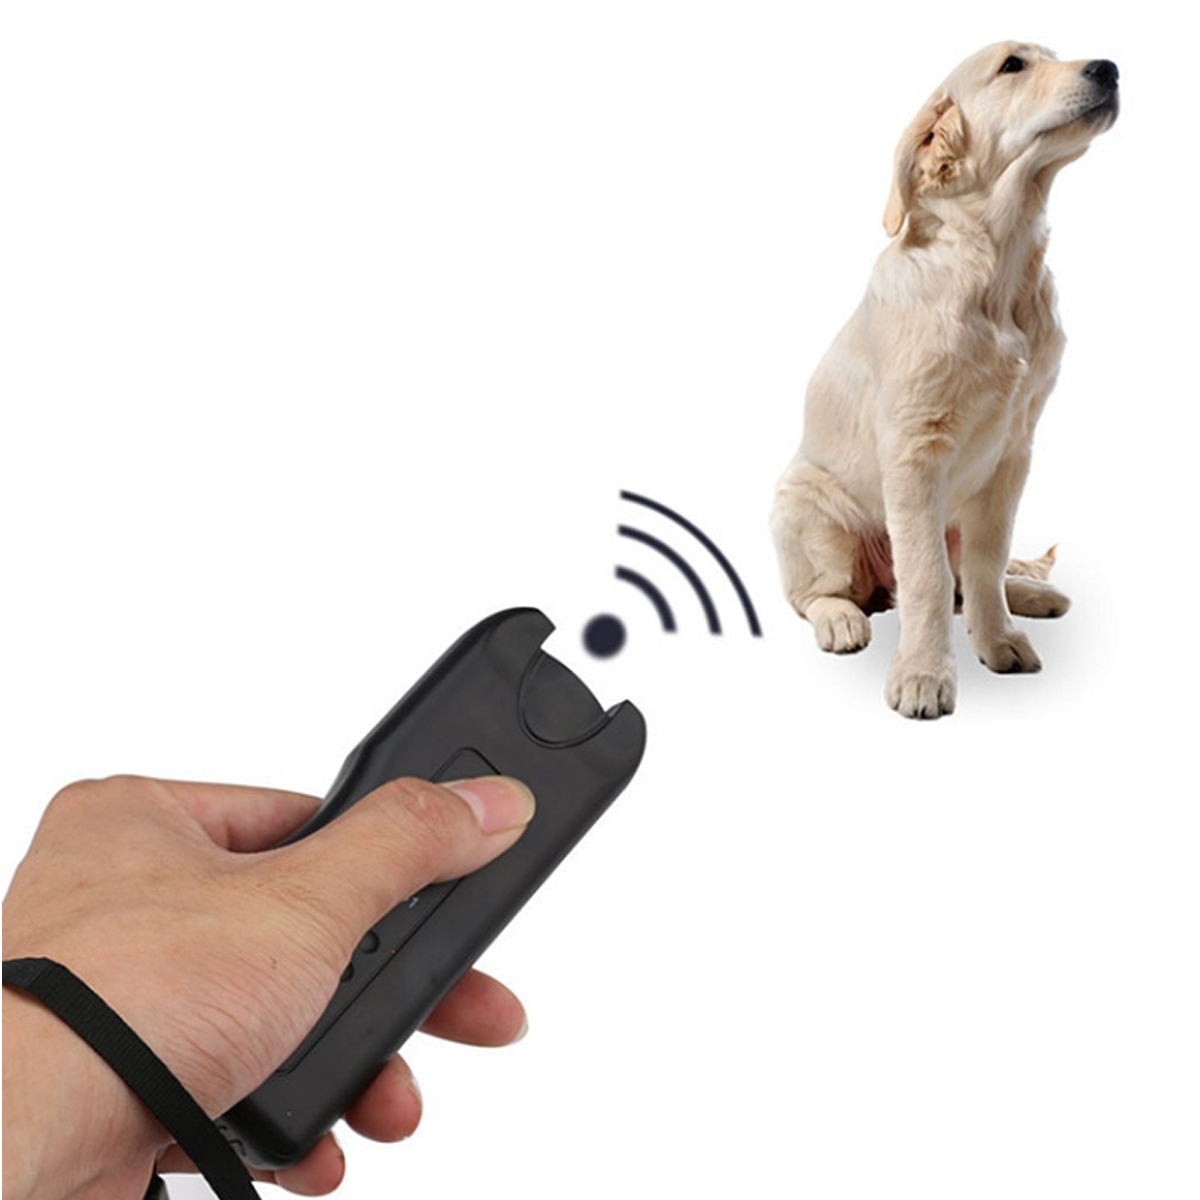 

3 In 1 LED Ultrasonic Anti Barking Pet Dog Train Repeller Control Trainer Device